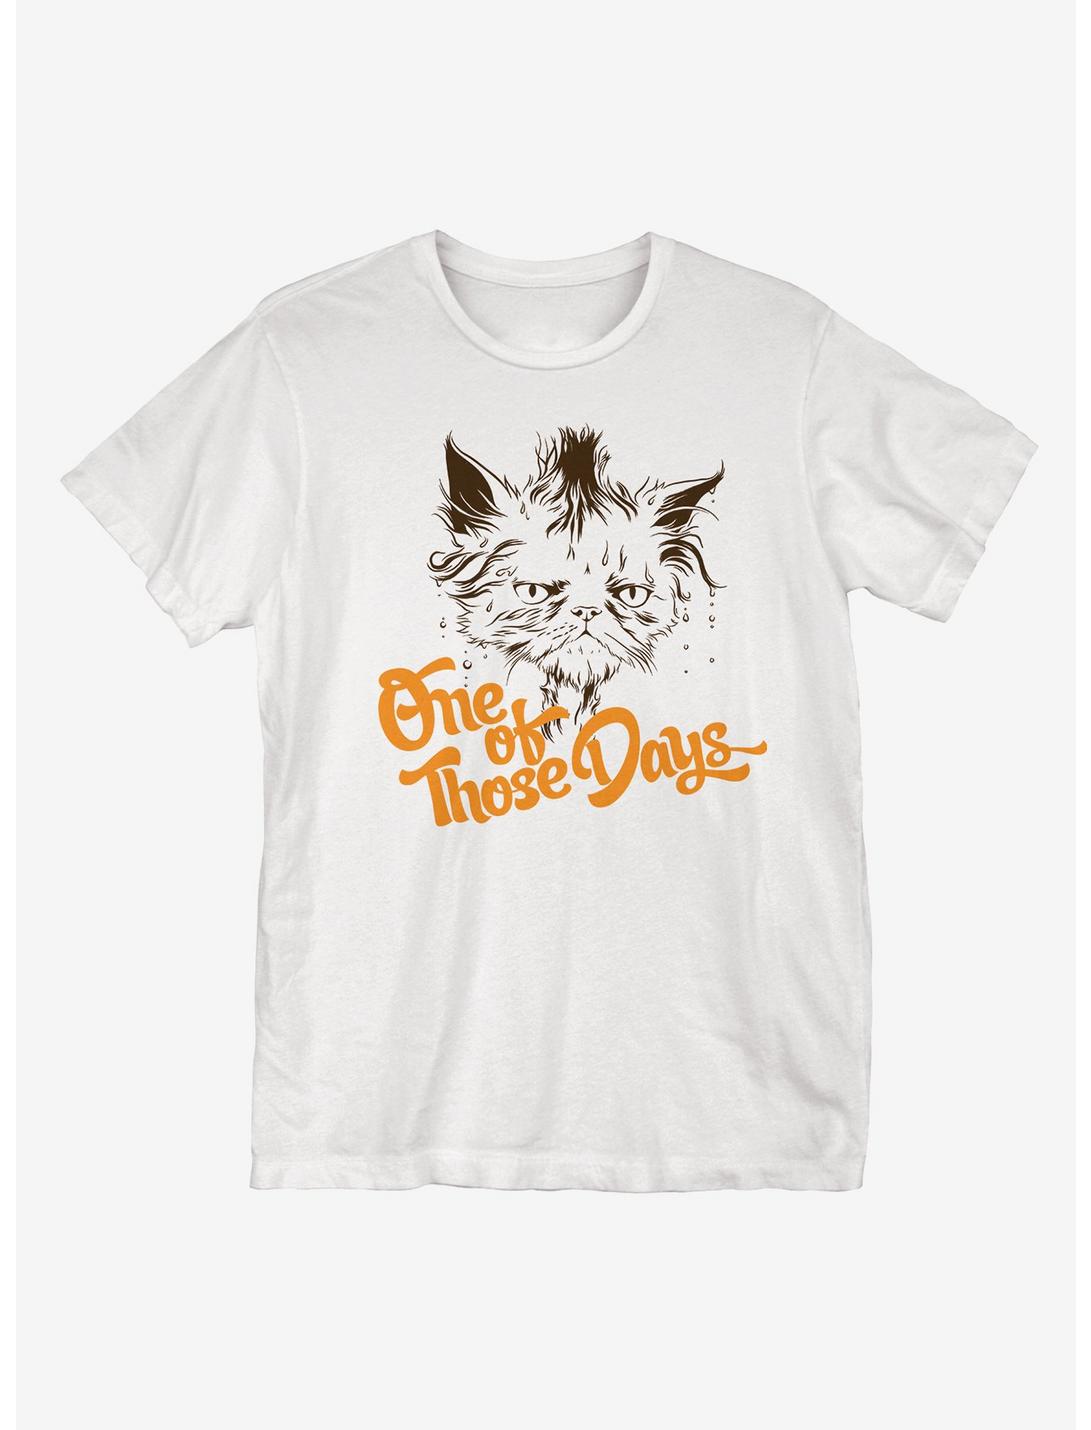 One of Those Days T-Shirt, WHITE, hi-res